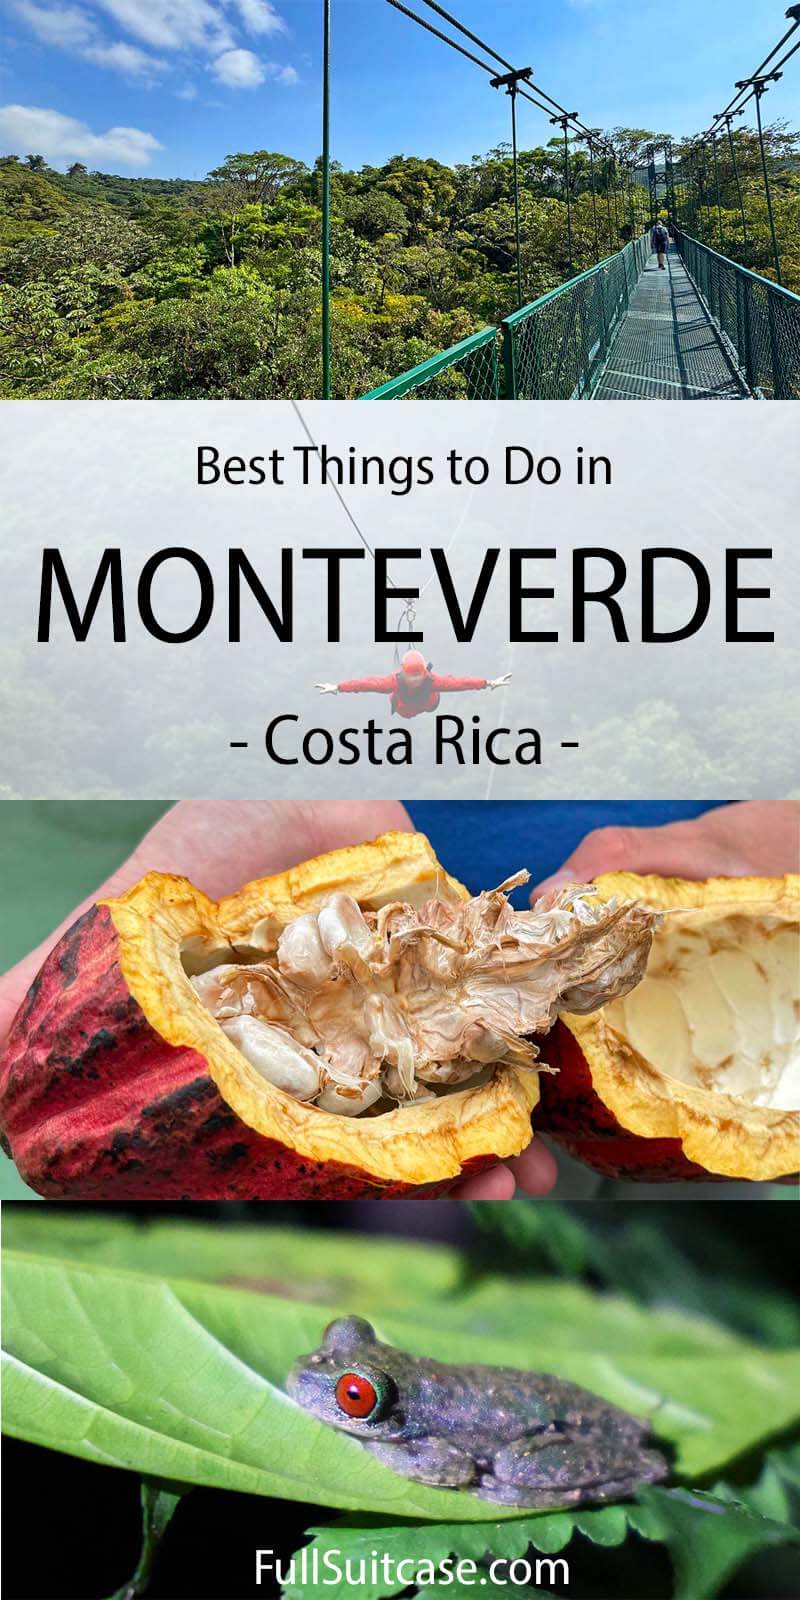 Best places to visit and things to do in Monteverde Costa Rica